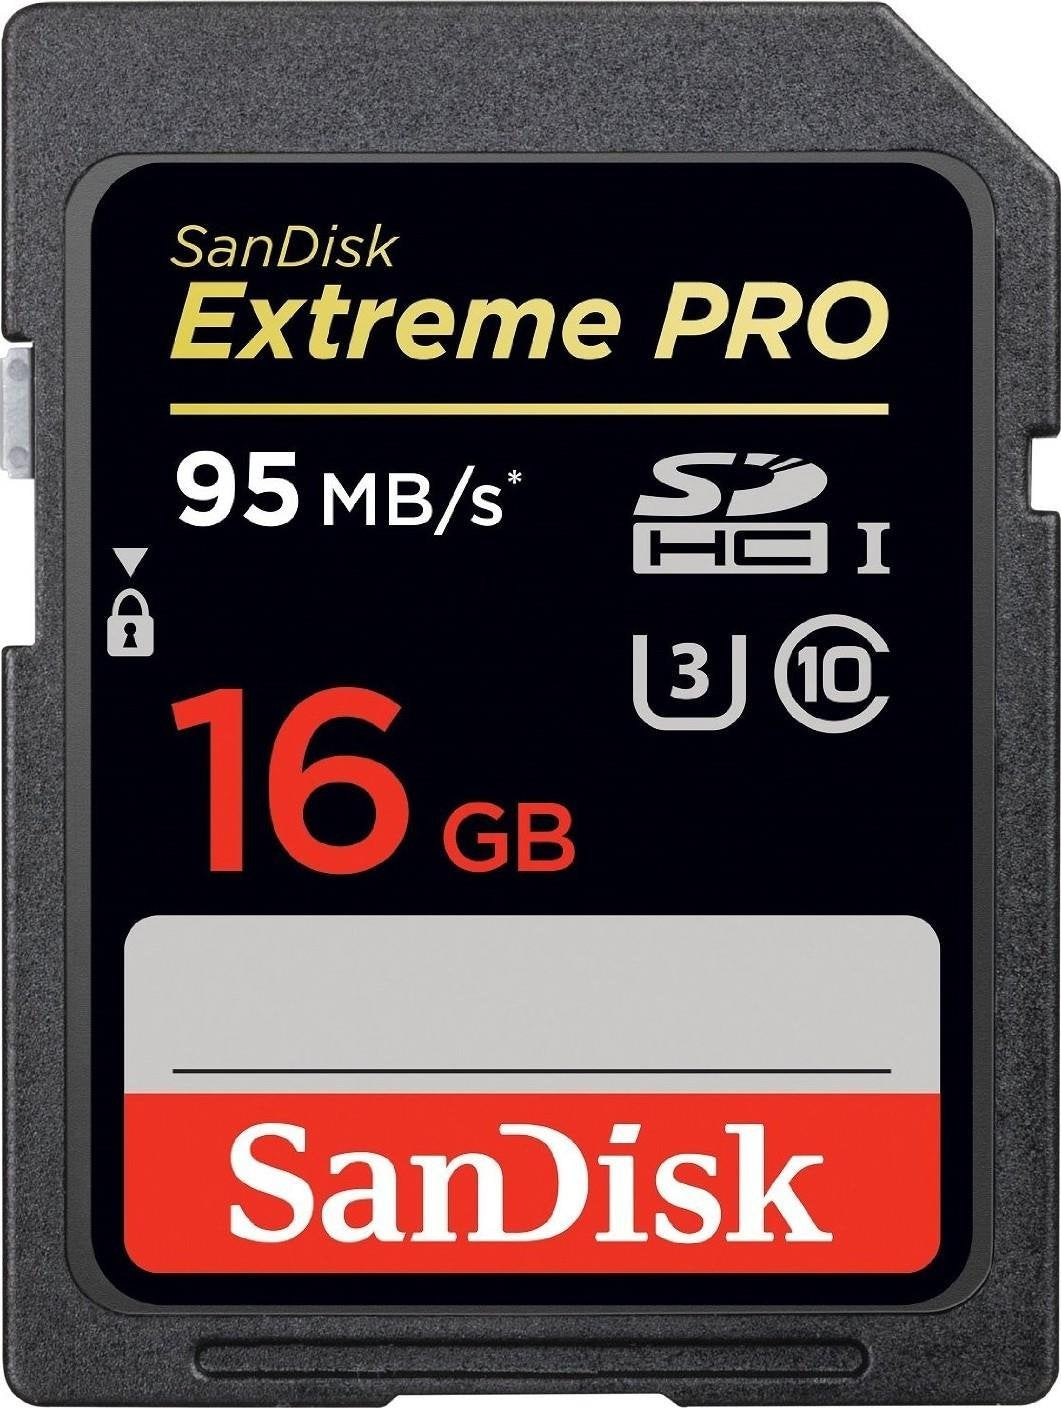 Sandisk 16GB Extreme Pro UHS1 SDHC Card 95MB/s ( SDSDXPA-016G-A75 ) (Open Box, Like New)